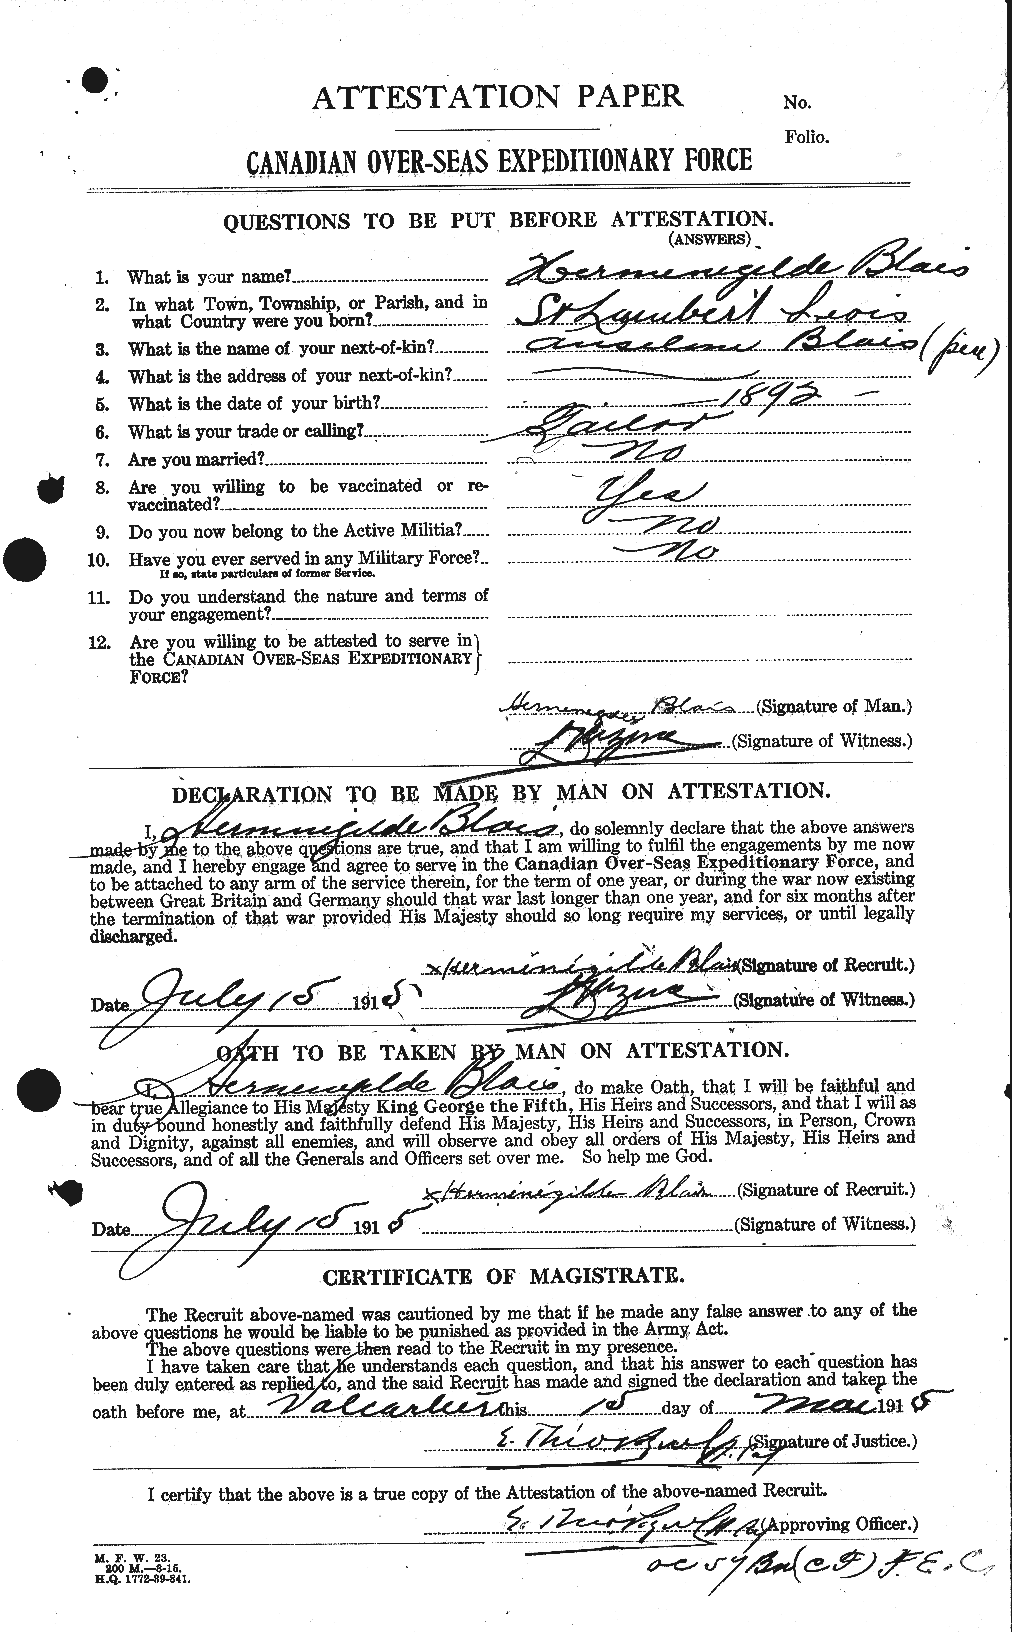 Personnel Records of the First World War - CEF 245439a